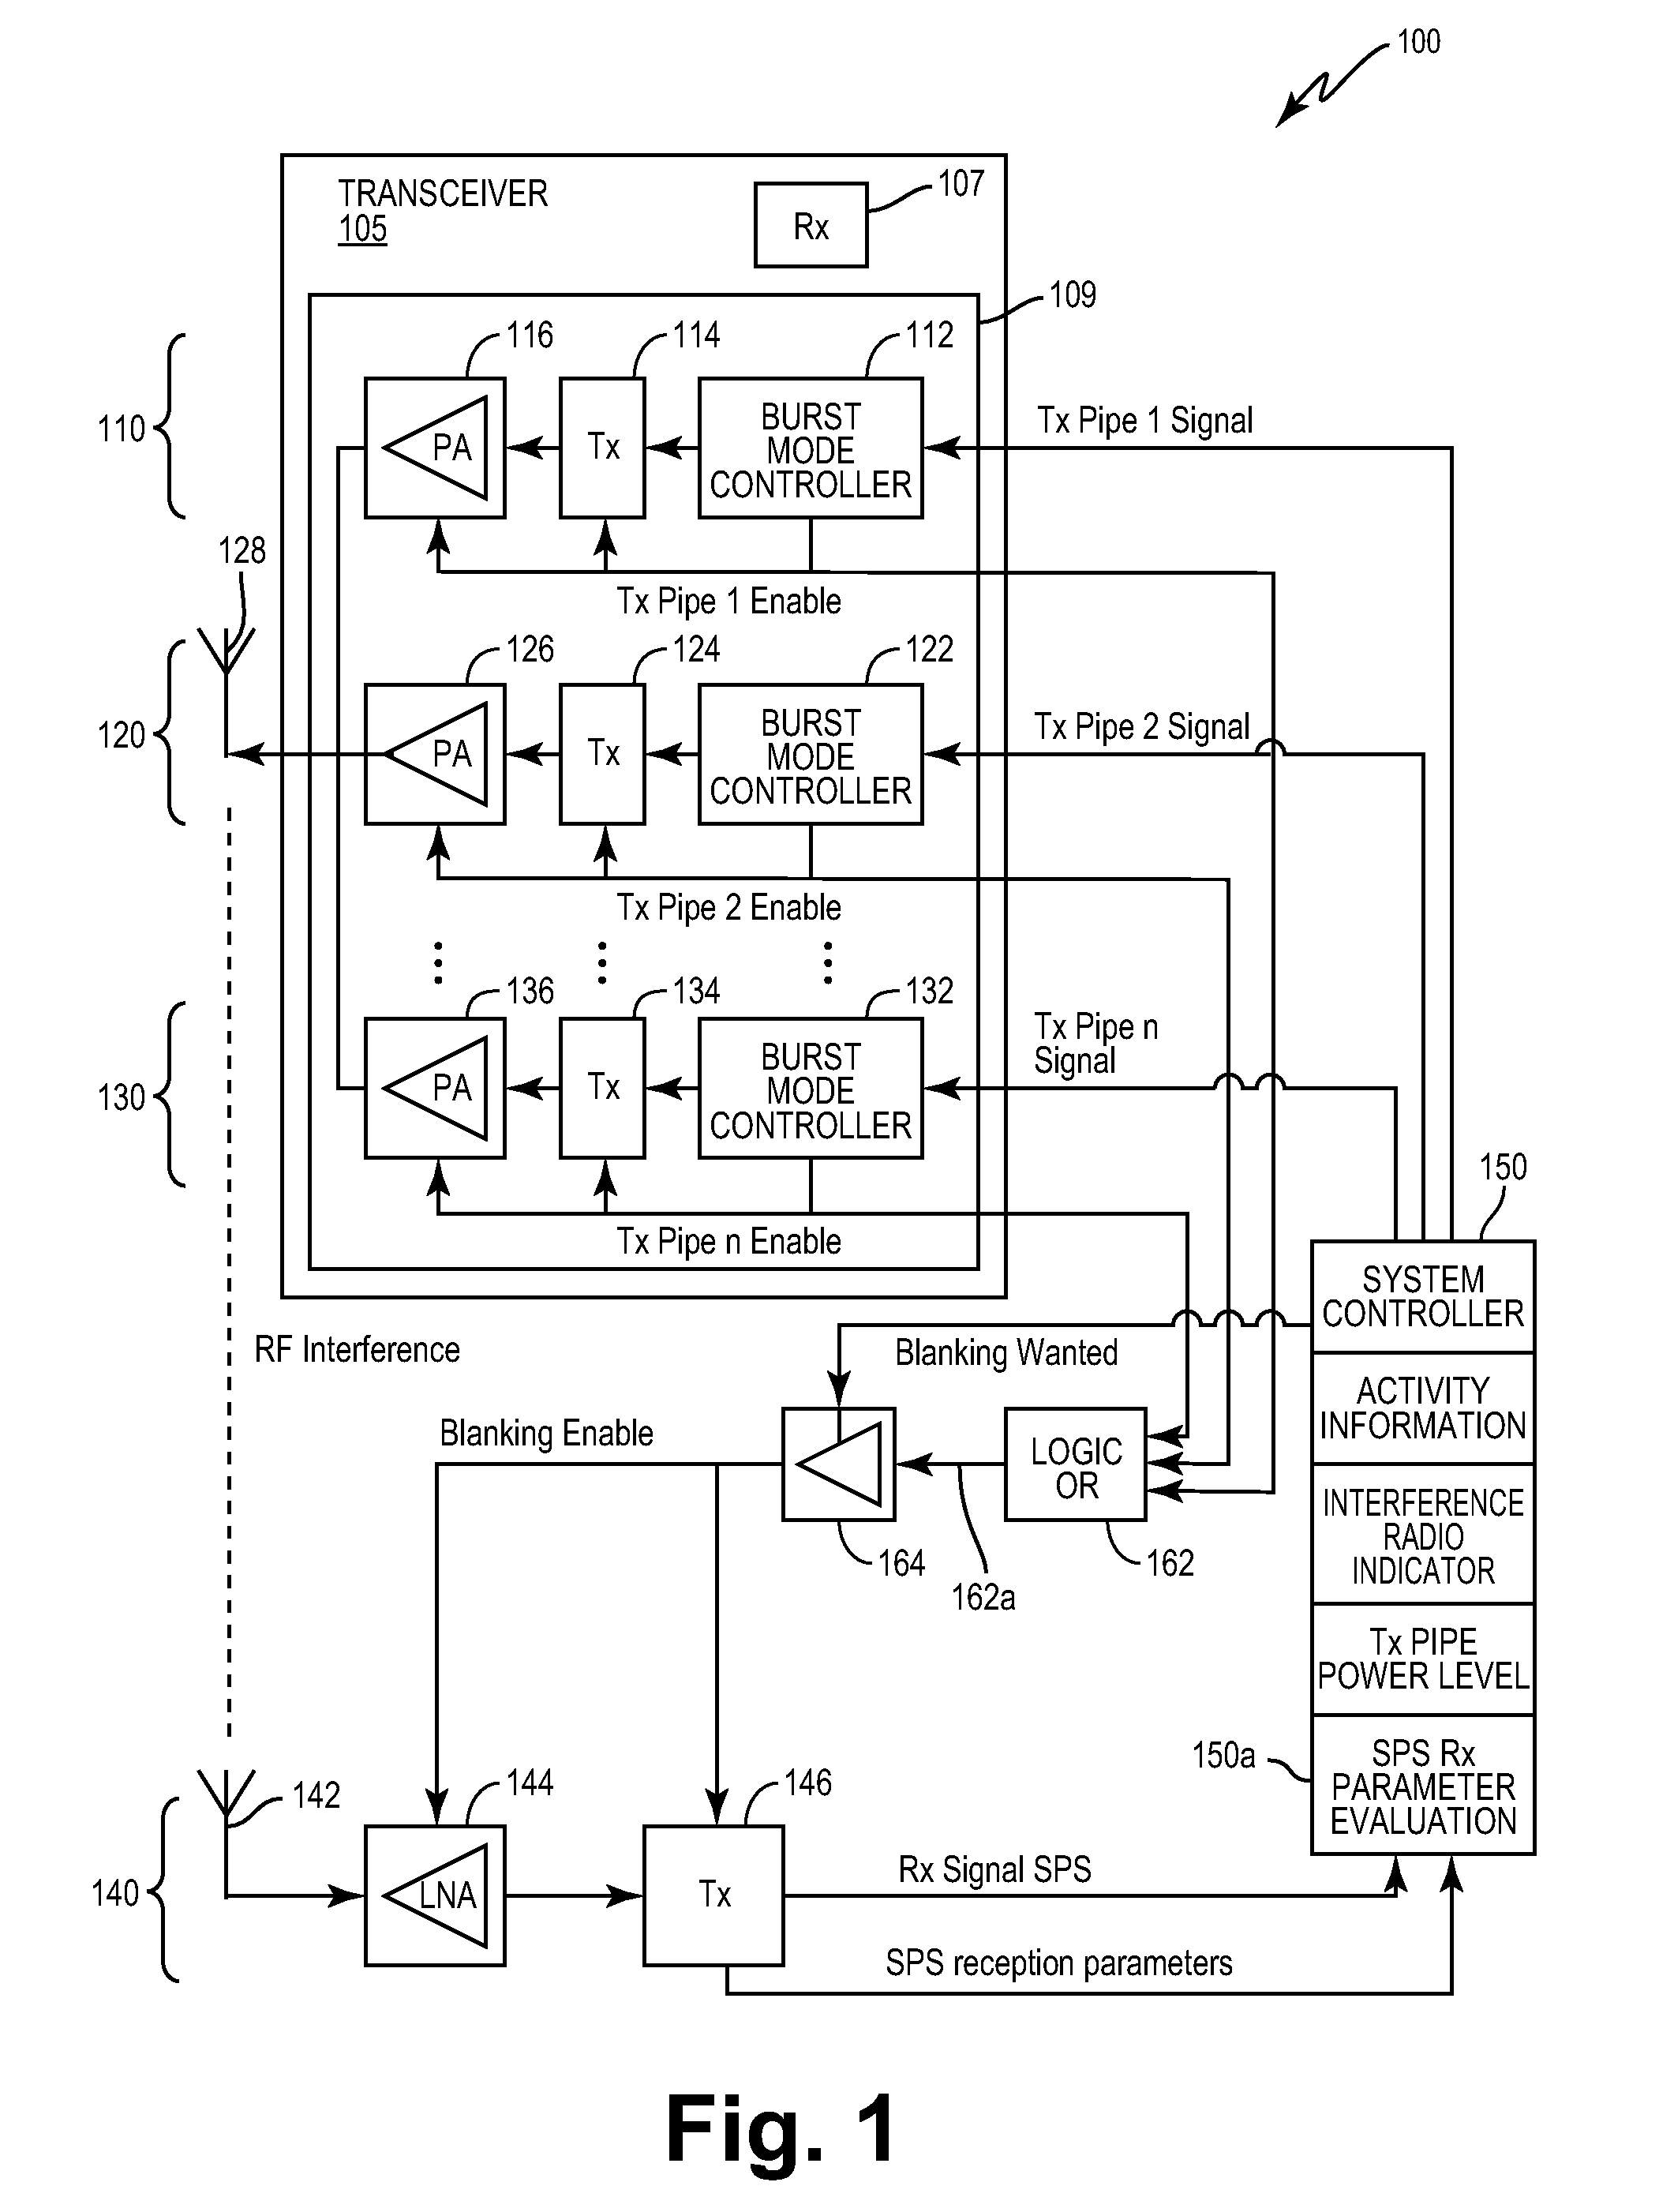 Method using a blanking signal to reduce the leakage transmitter-receiver